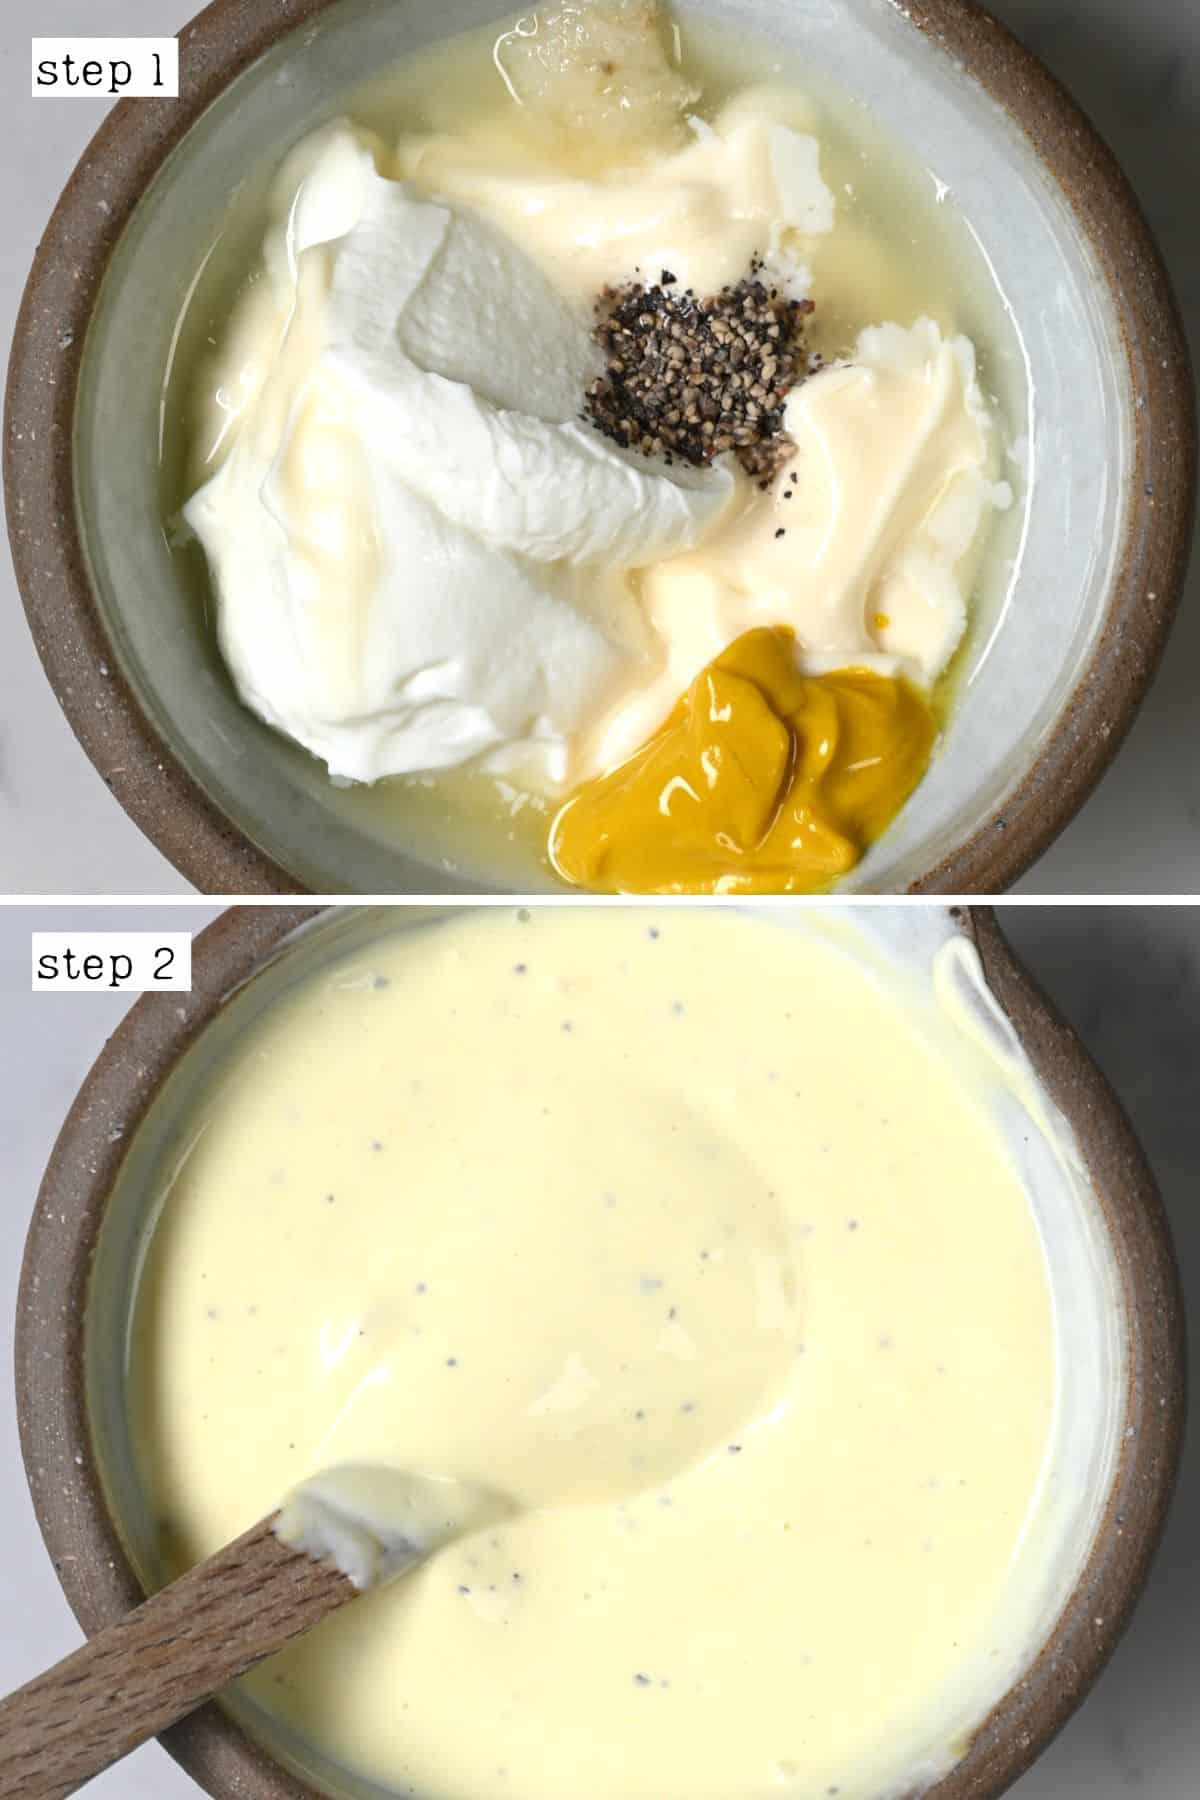 Steps for making artichoke dipping sauce